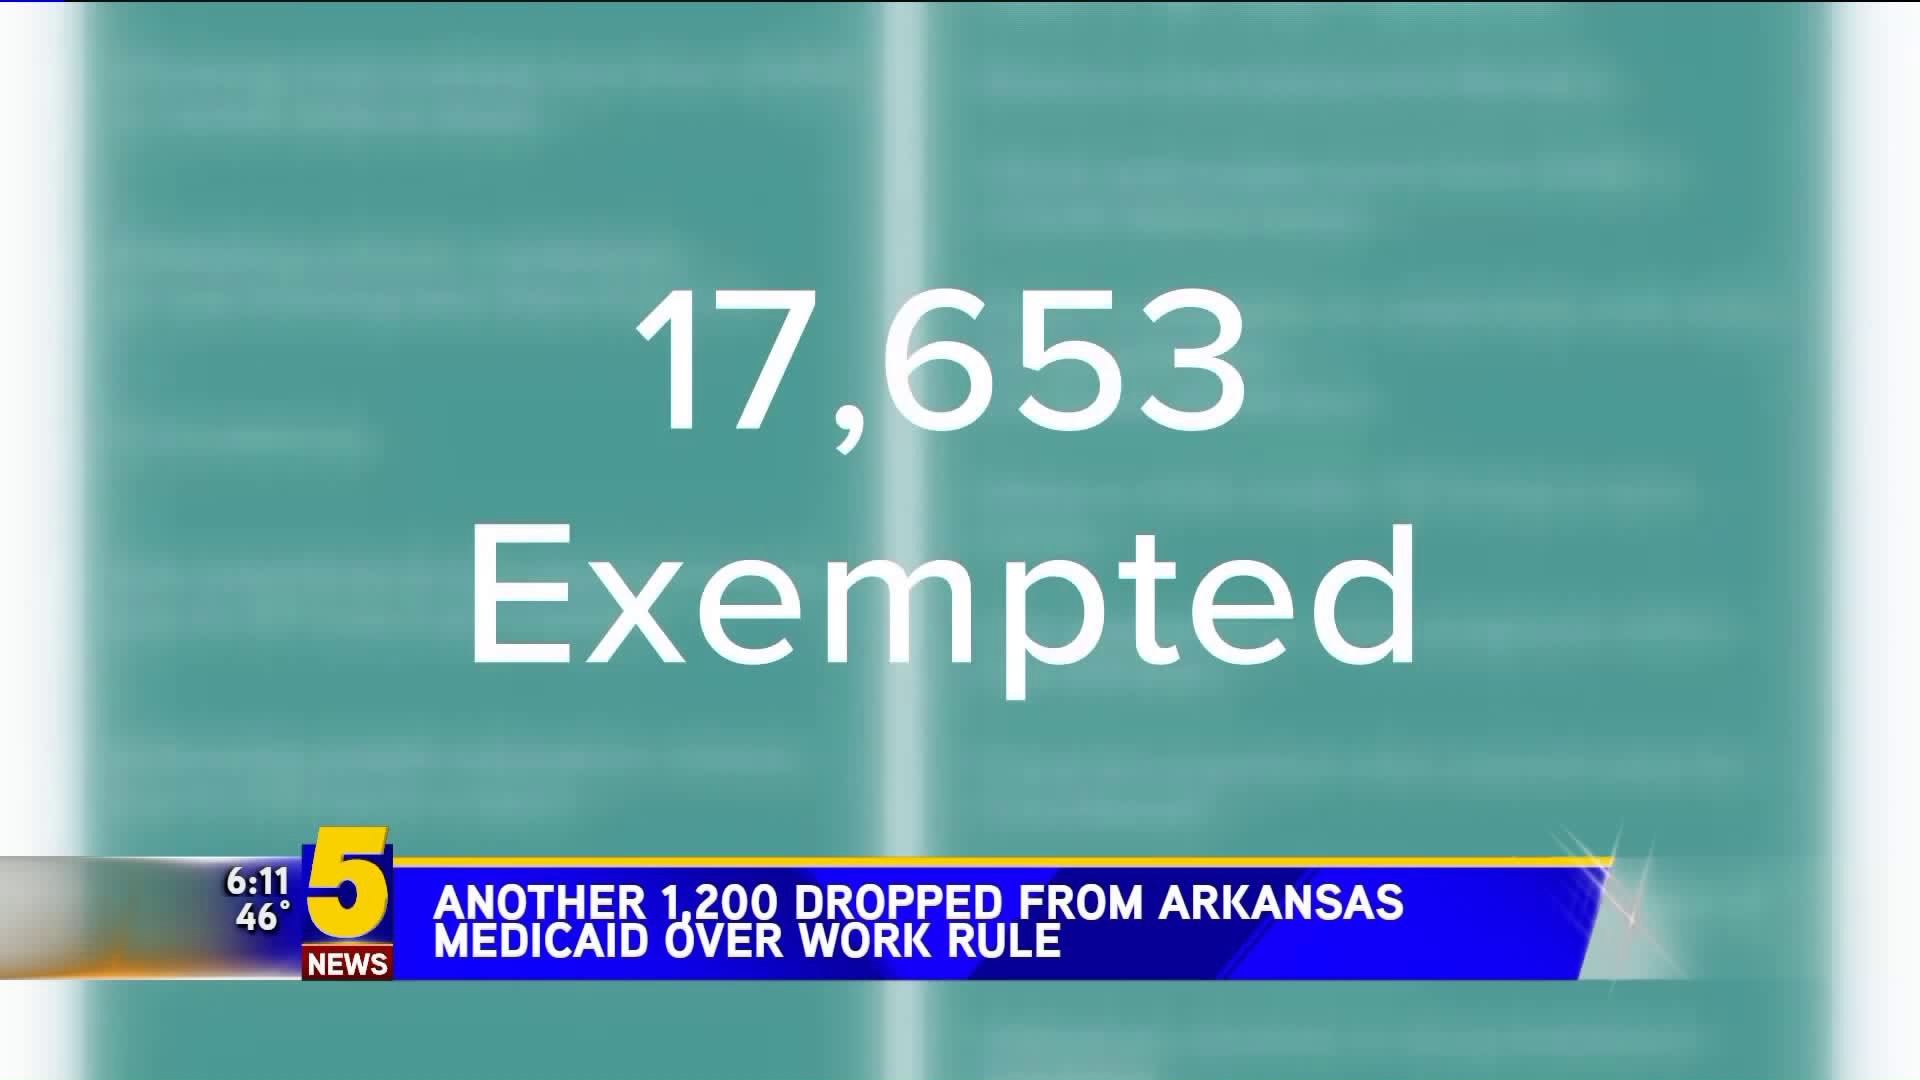 Another 1,200 Dropped From Arkansas Medicaid Over Work Rule